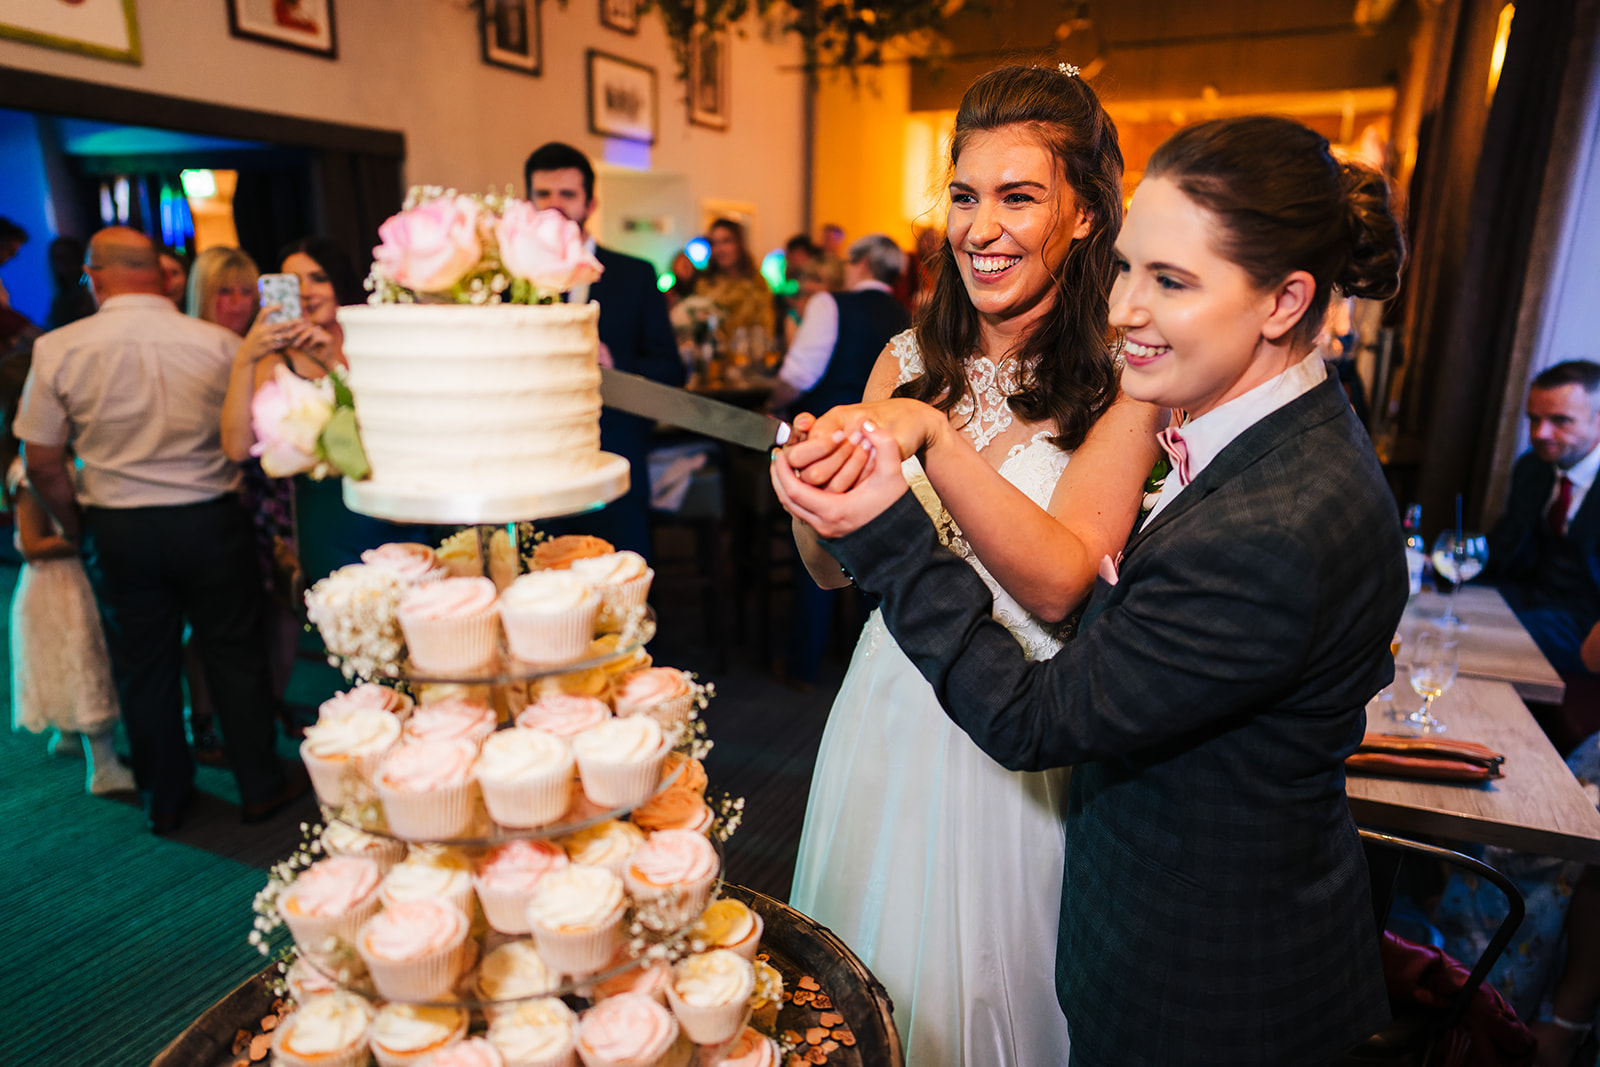 The Brewhouse & Kitchen Wedding Photography - the two bride is cutting the wedding